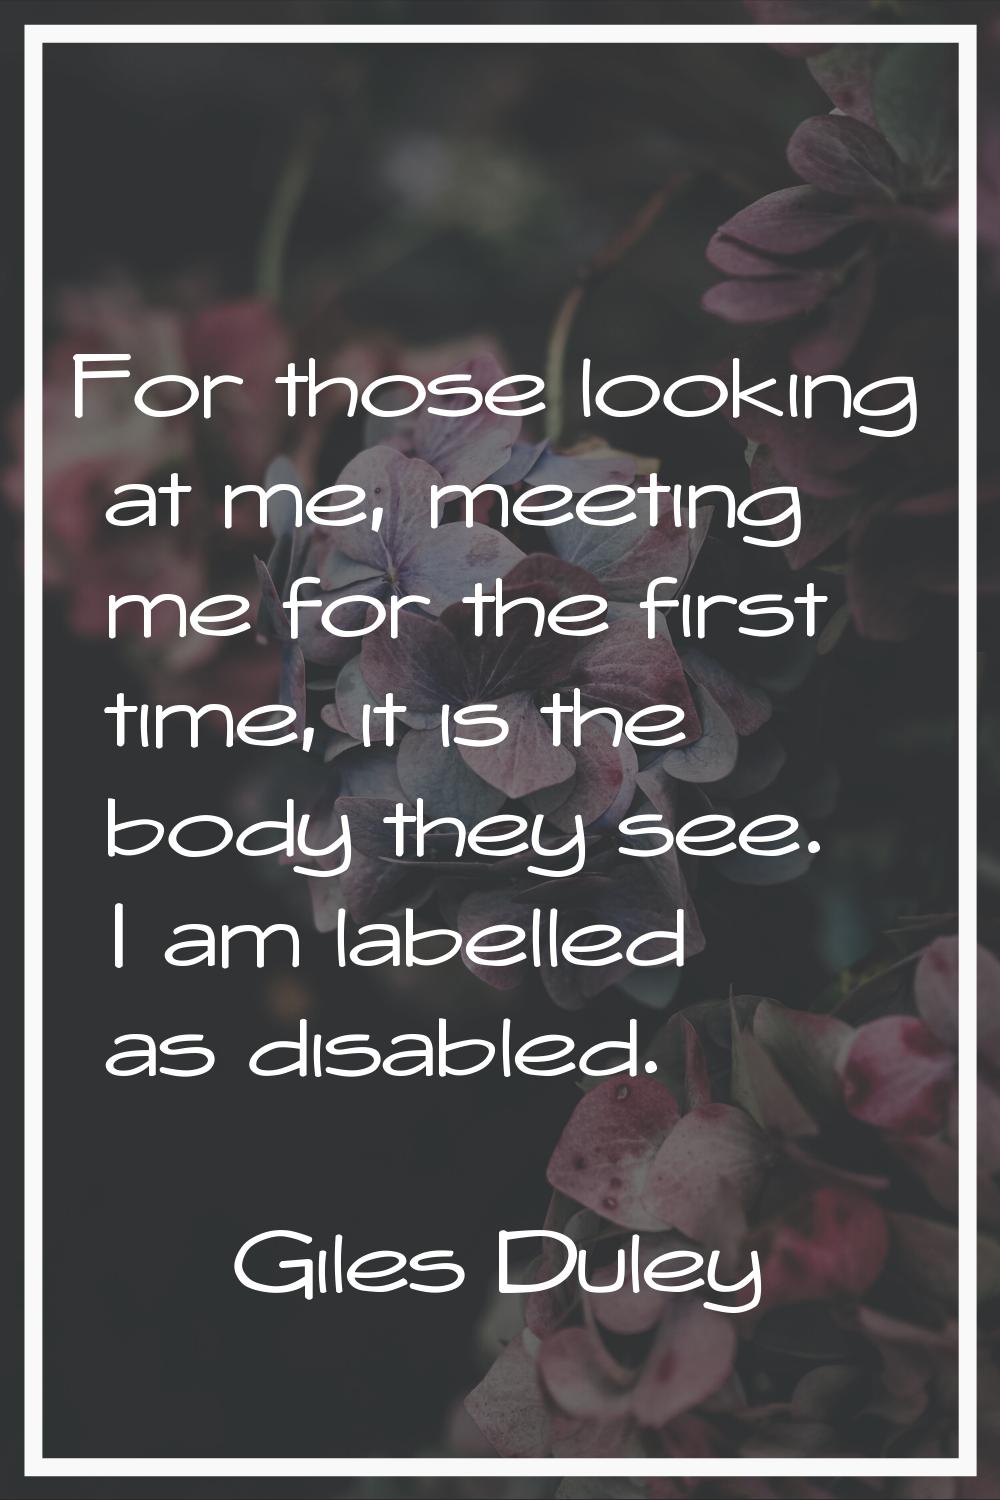 For those looking at me, meeting me for the first time, it is the body they see. I am labelled as d